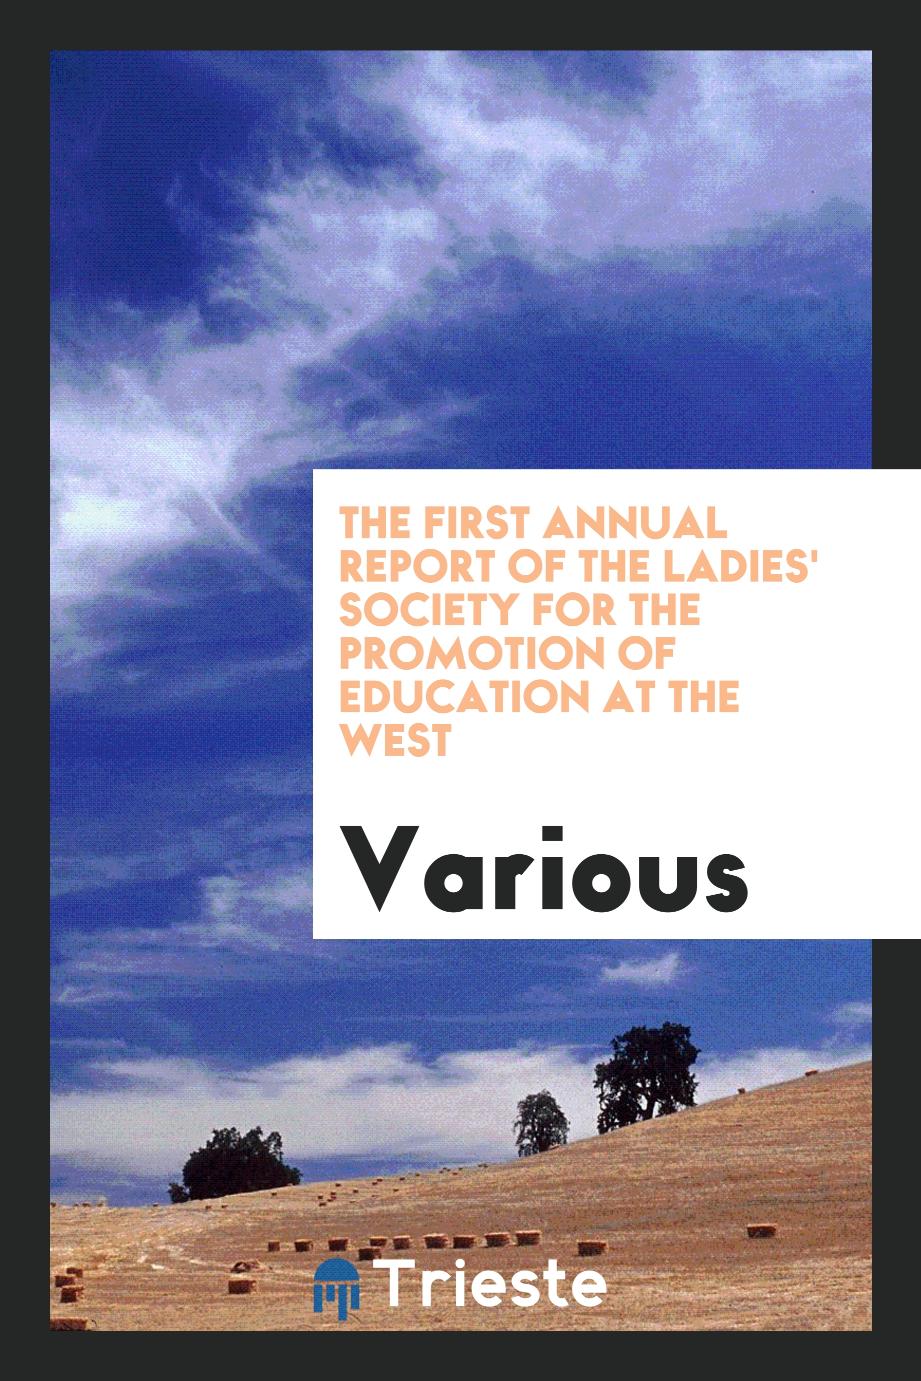 The First annual report of the Ladies' Society for the Promotion of Education at the West